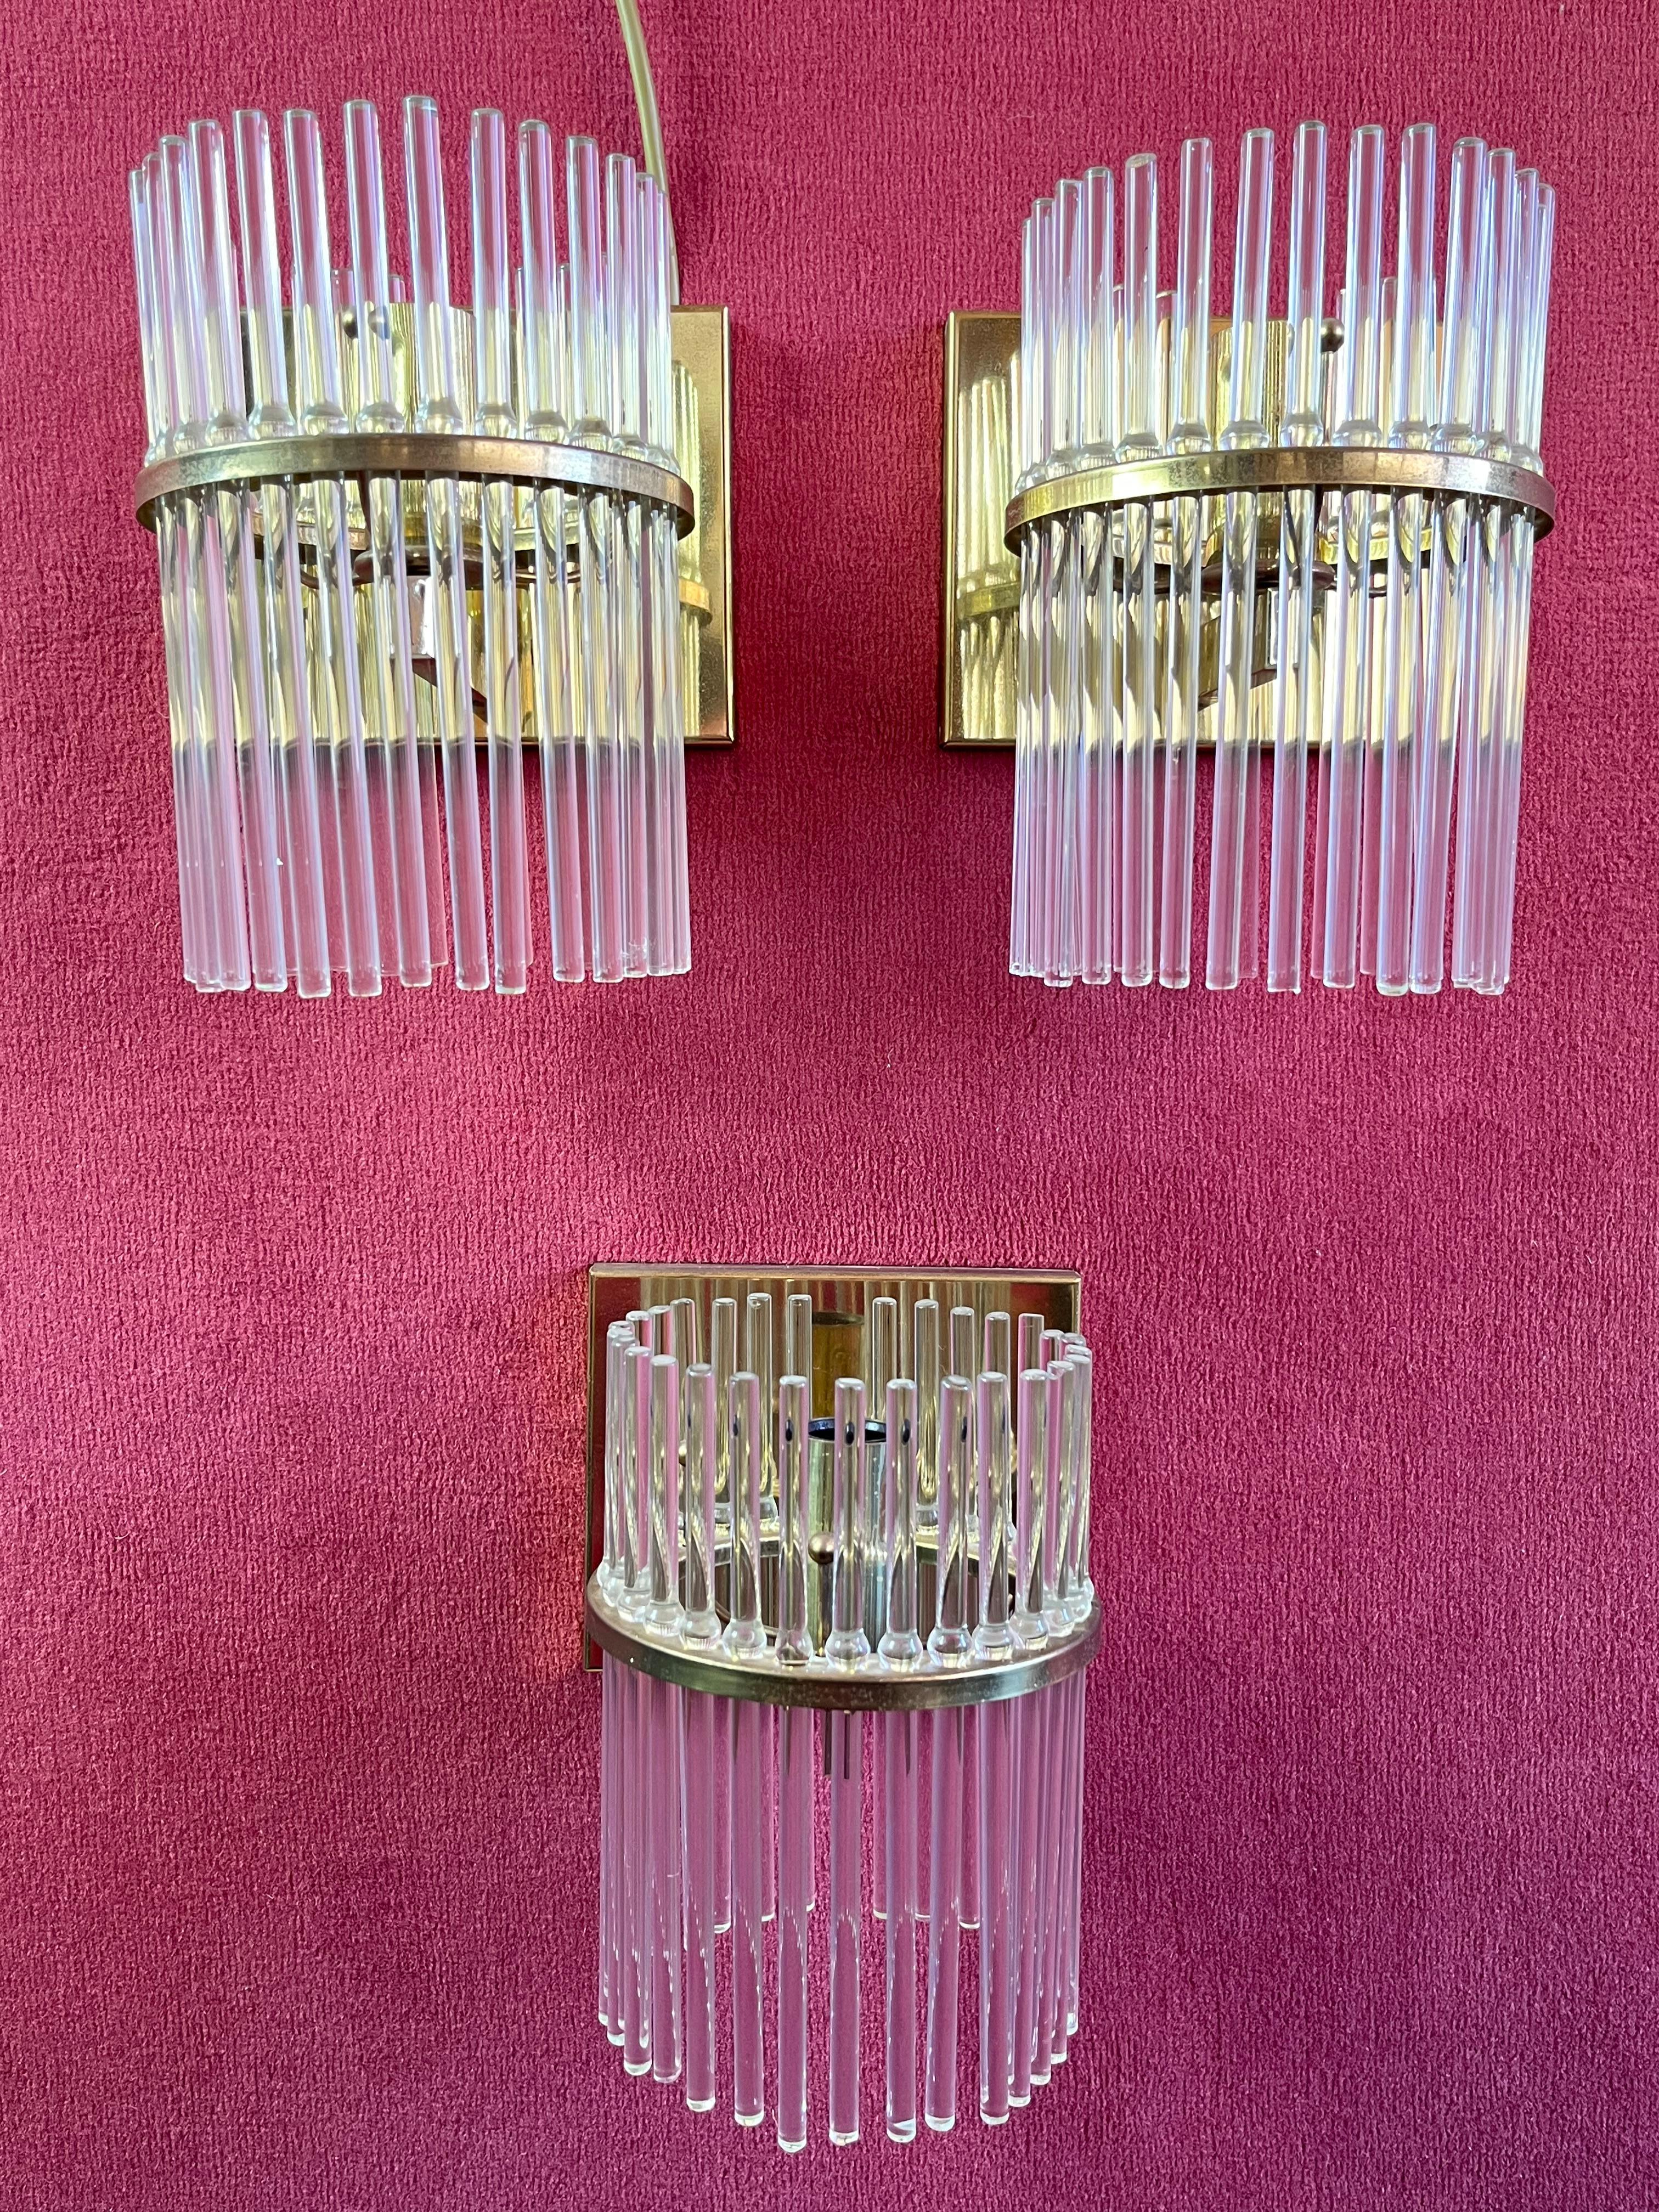 Set of 3 Sciolari brass and Murano glass wall lamps, Mid-Century 1960s.
Intact and in good condition, small signs of aging.
E14 lamps.

We guarantee adequate packaging and will ship via DHL, insuring the contents against any breakage or loss of the